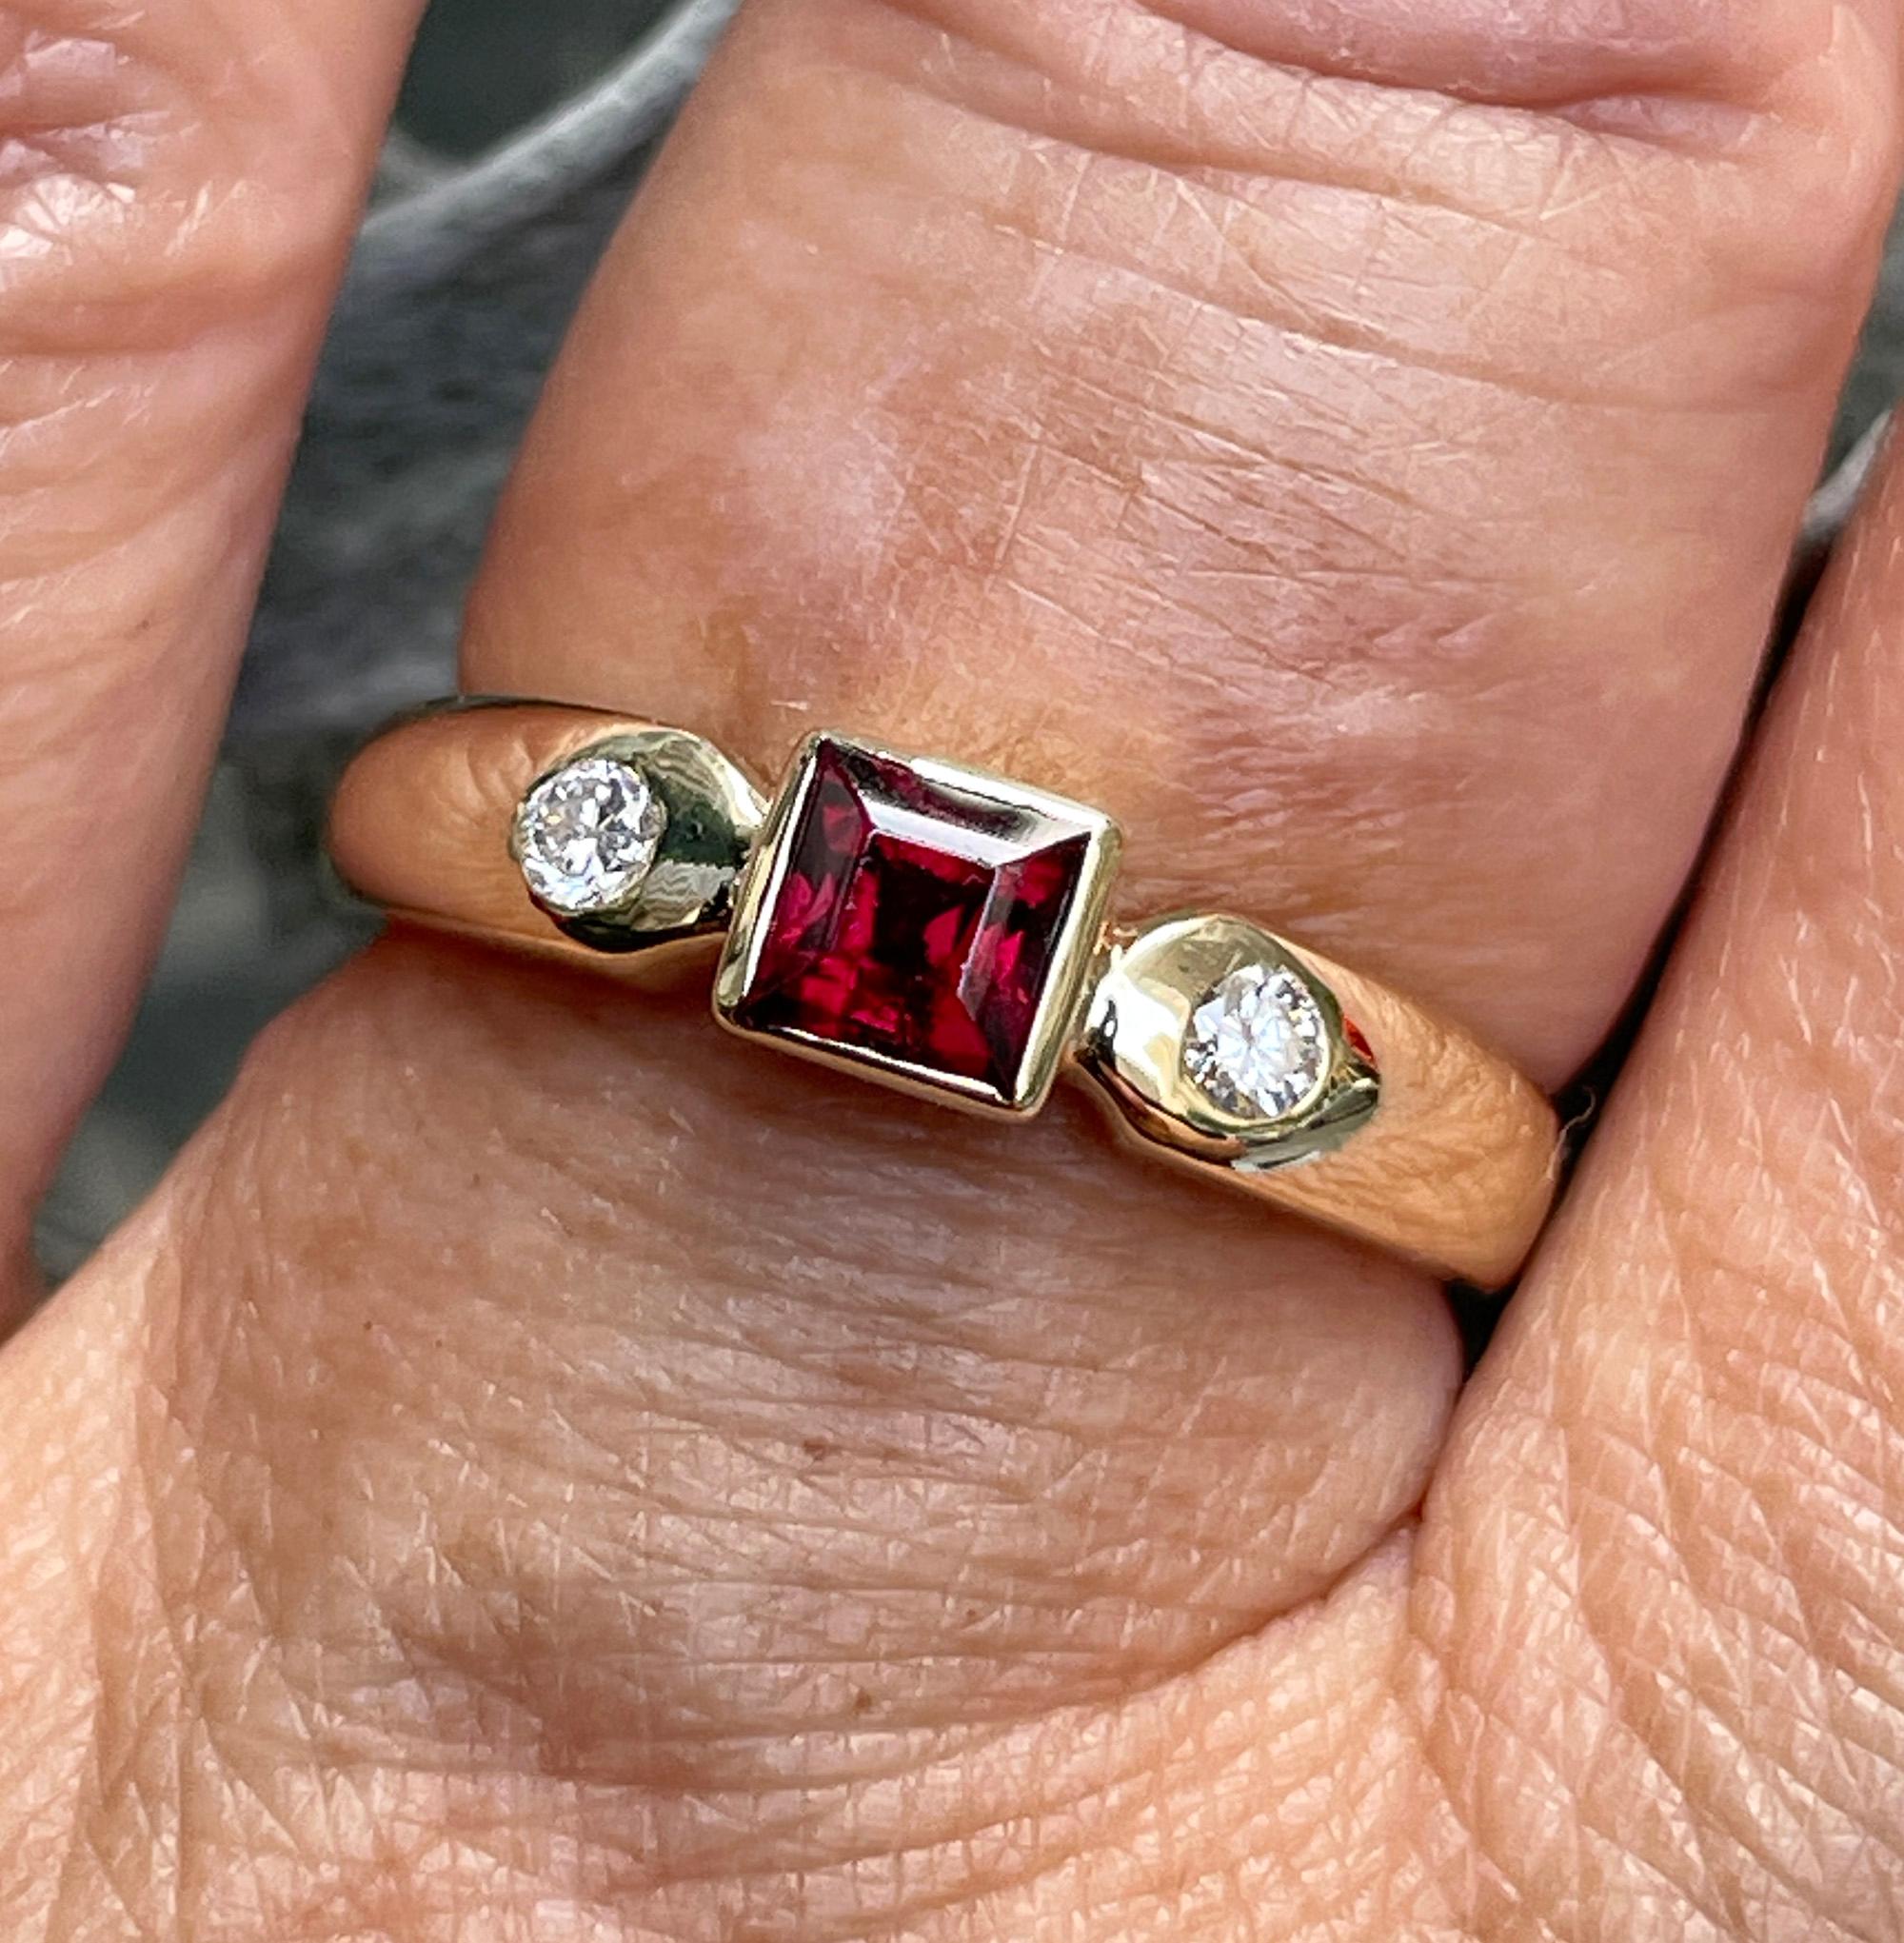 This super Wearable and versatile vintage Garnet and Diamond Gold Ring  will make a beautiful unique alternative Wedding or Anniversary, Promise ring or Right Hand Ring that easy to stack. It's truly ageless, it'll look just as boatful on a teenage